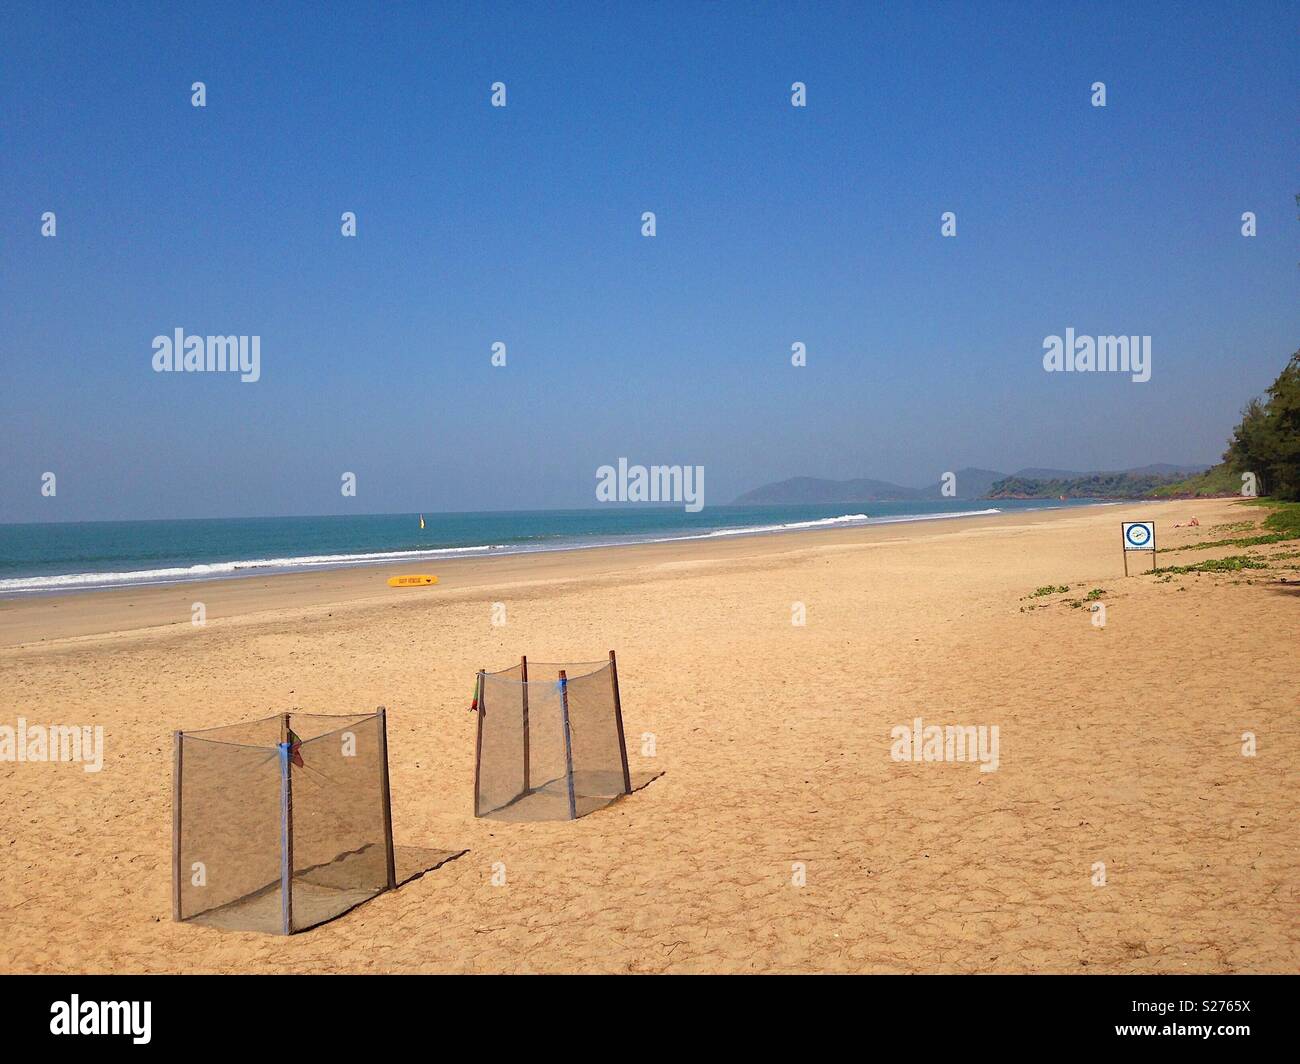 Protected turtle nesting sites on empty beach Stock Photo